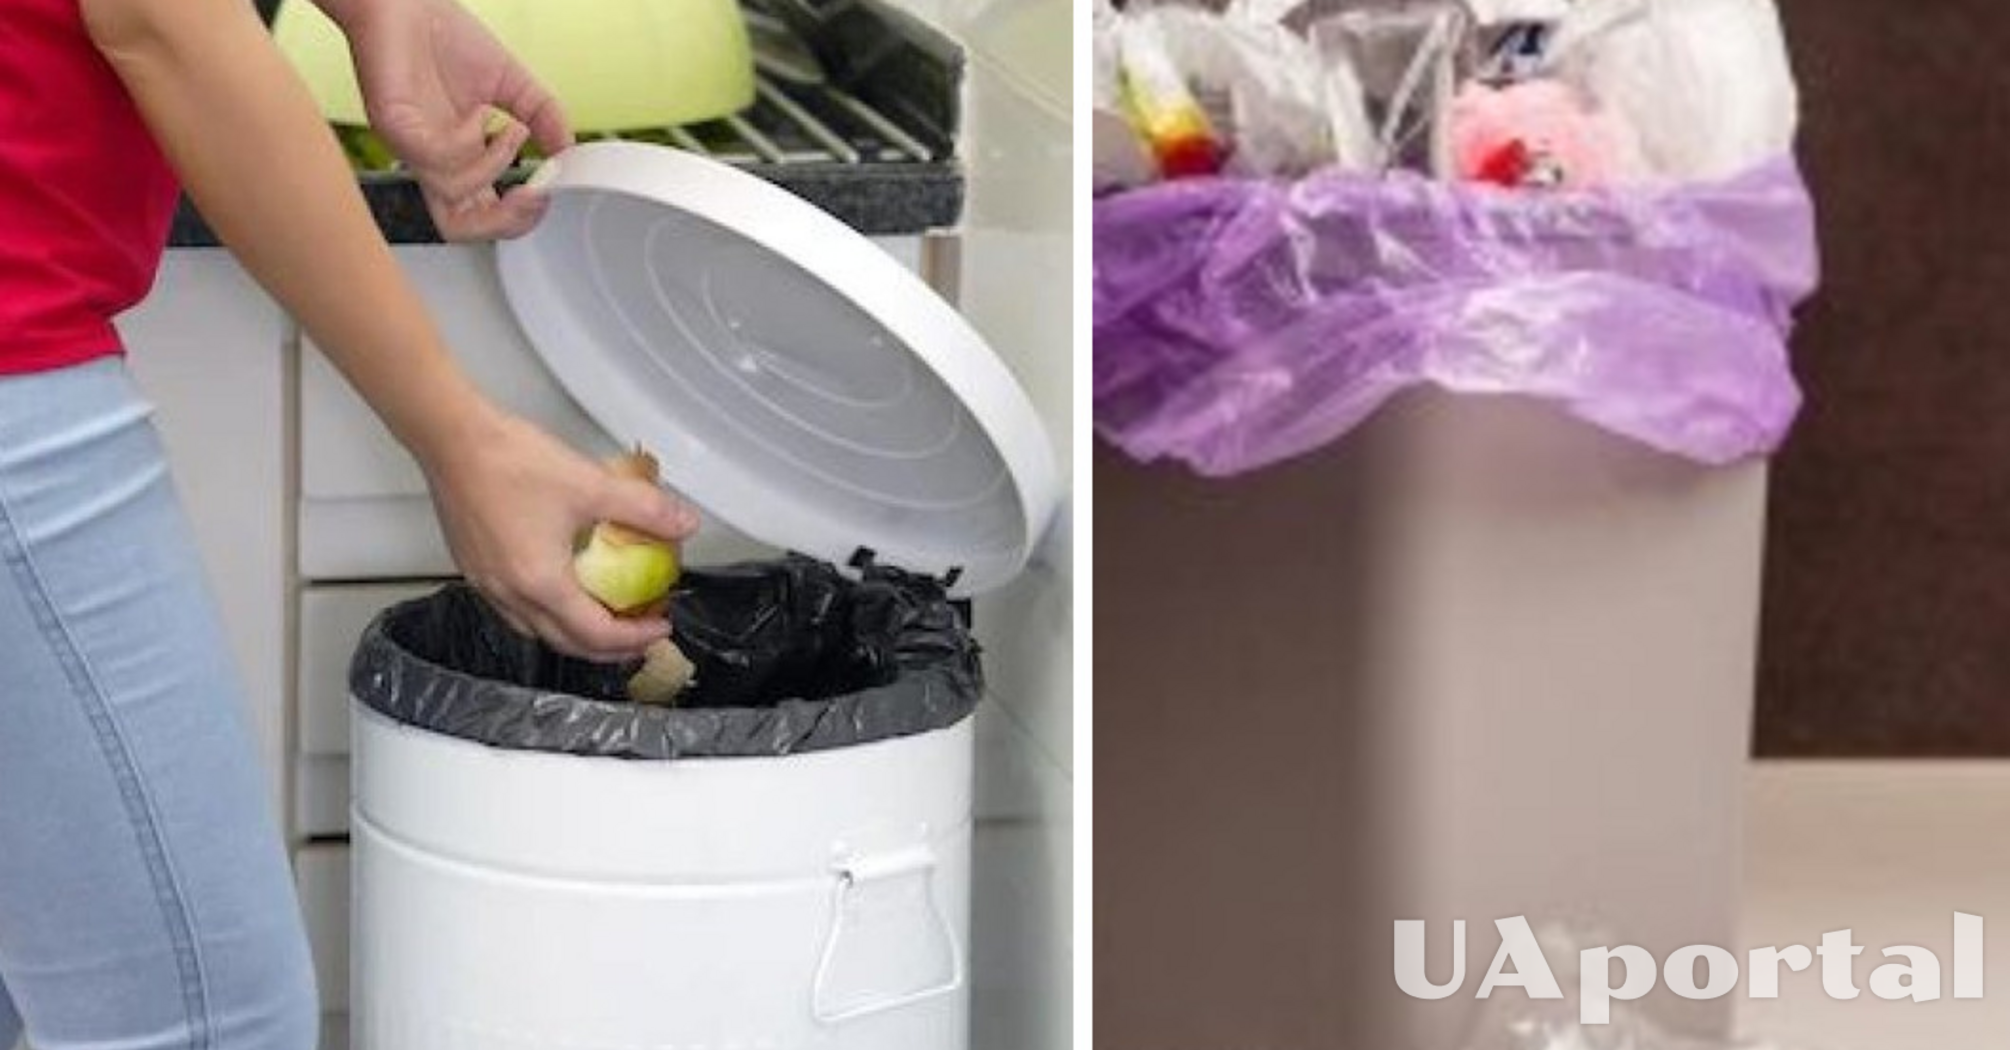 How to remove an unpleasant odor from a trash can without expensive chemicals: a life hack